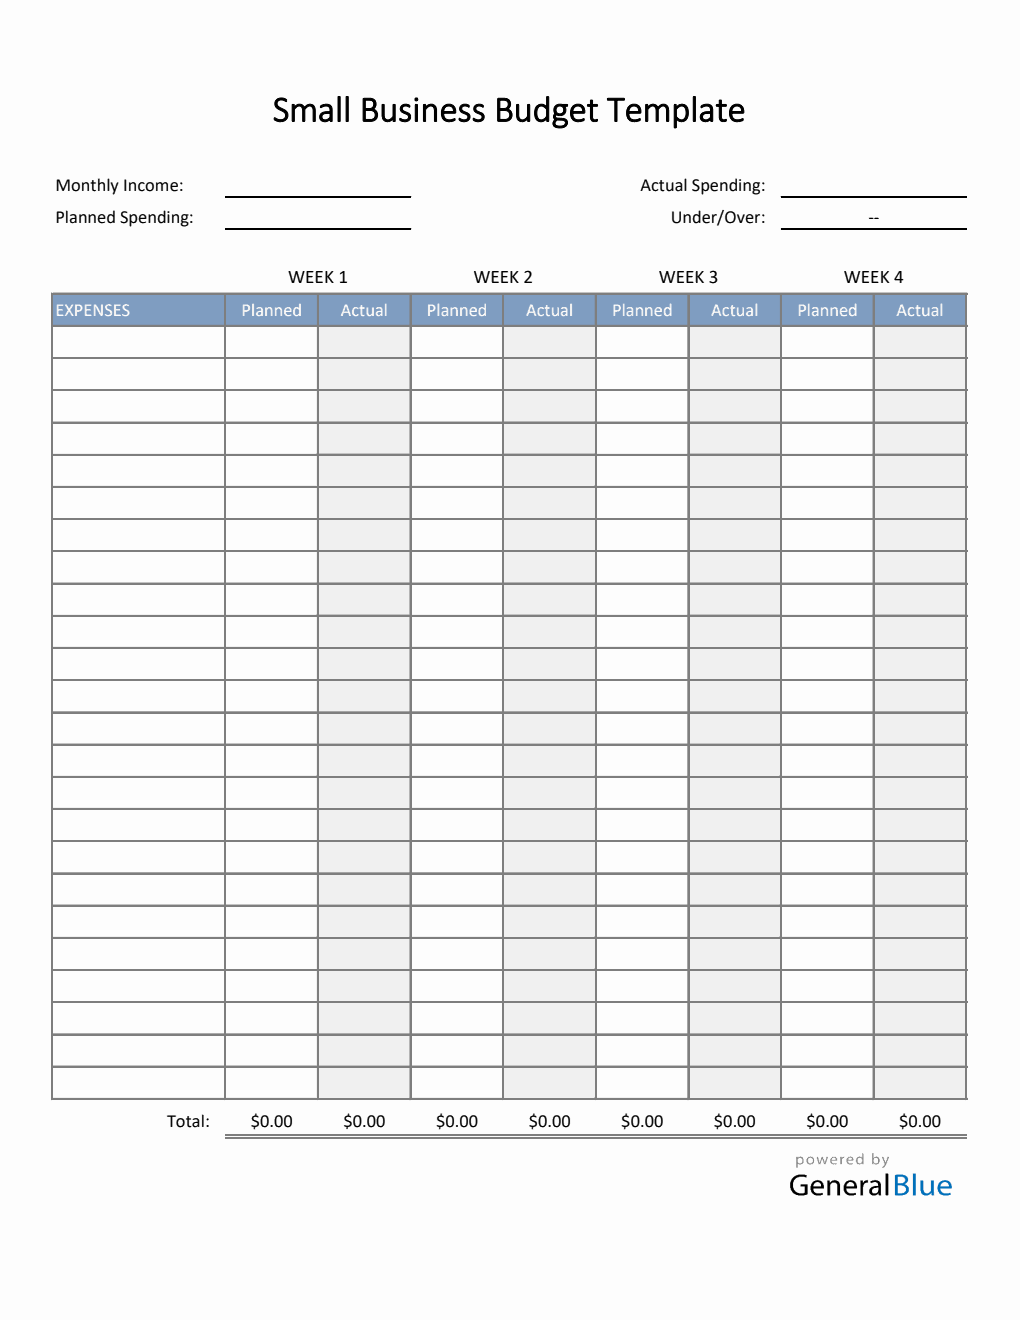 Small Business Budget Template in Excel (Basic)